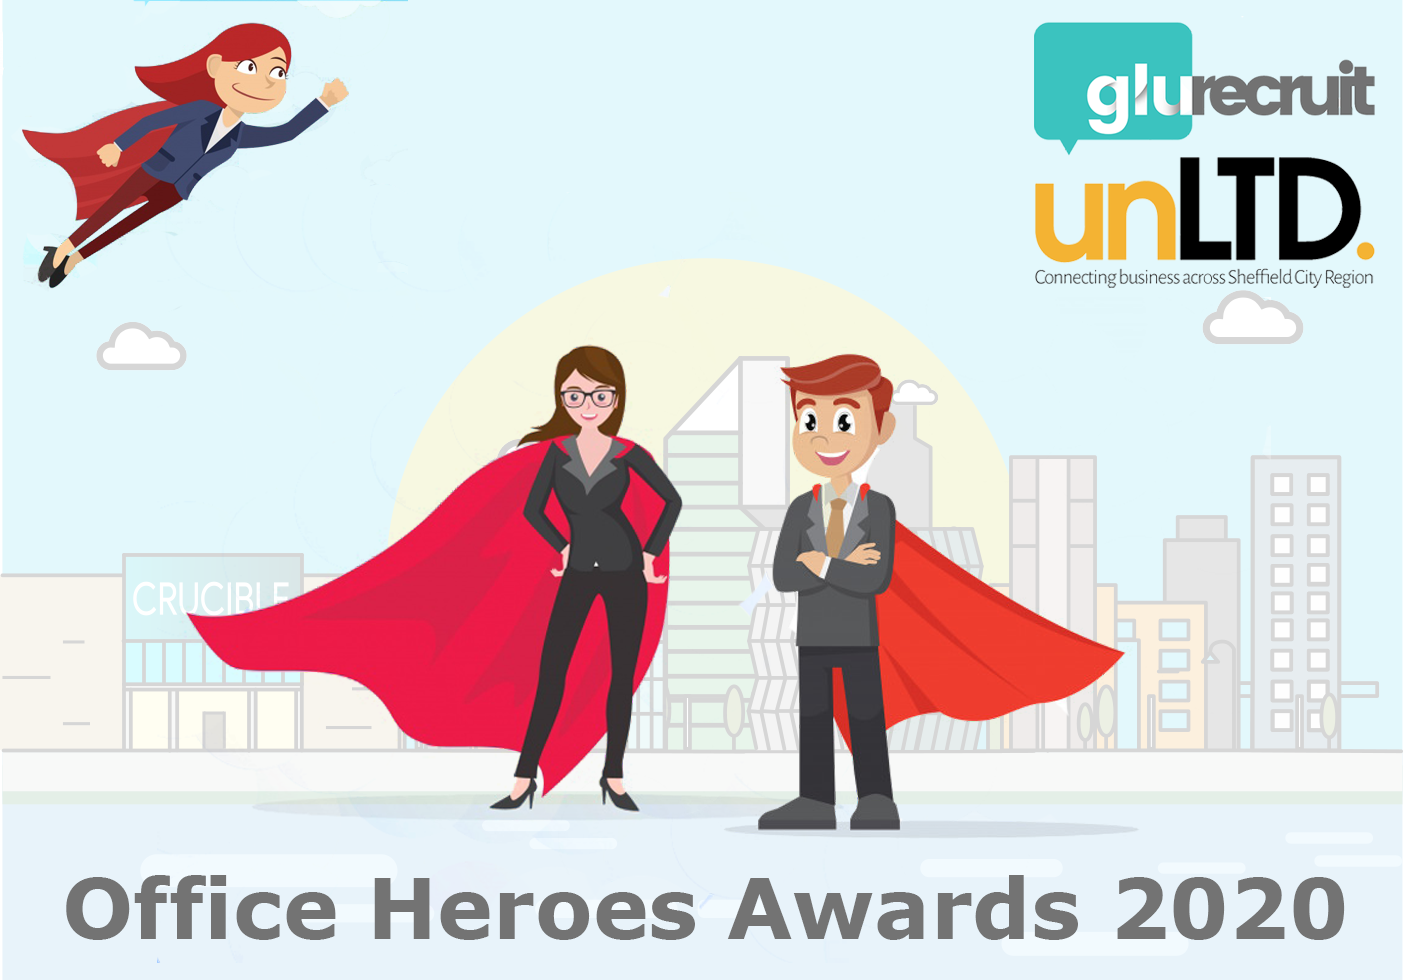 The Office Heroes Awards are back, and Glu Recruit need your nominations!